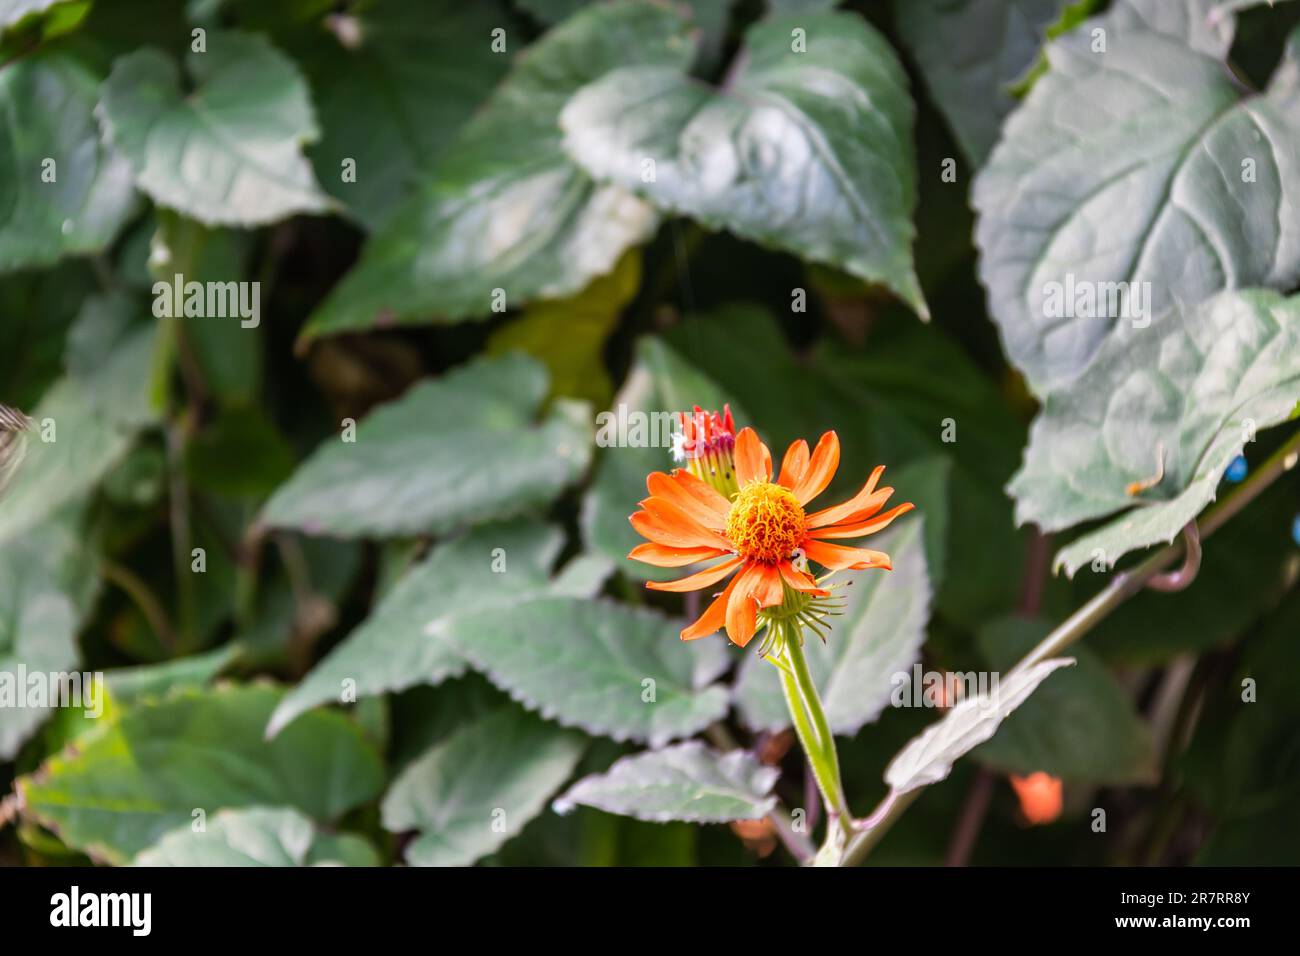 A close of a blooming Mexican Flame Vine on a slightly blurred background of green leaves. Stock Photo